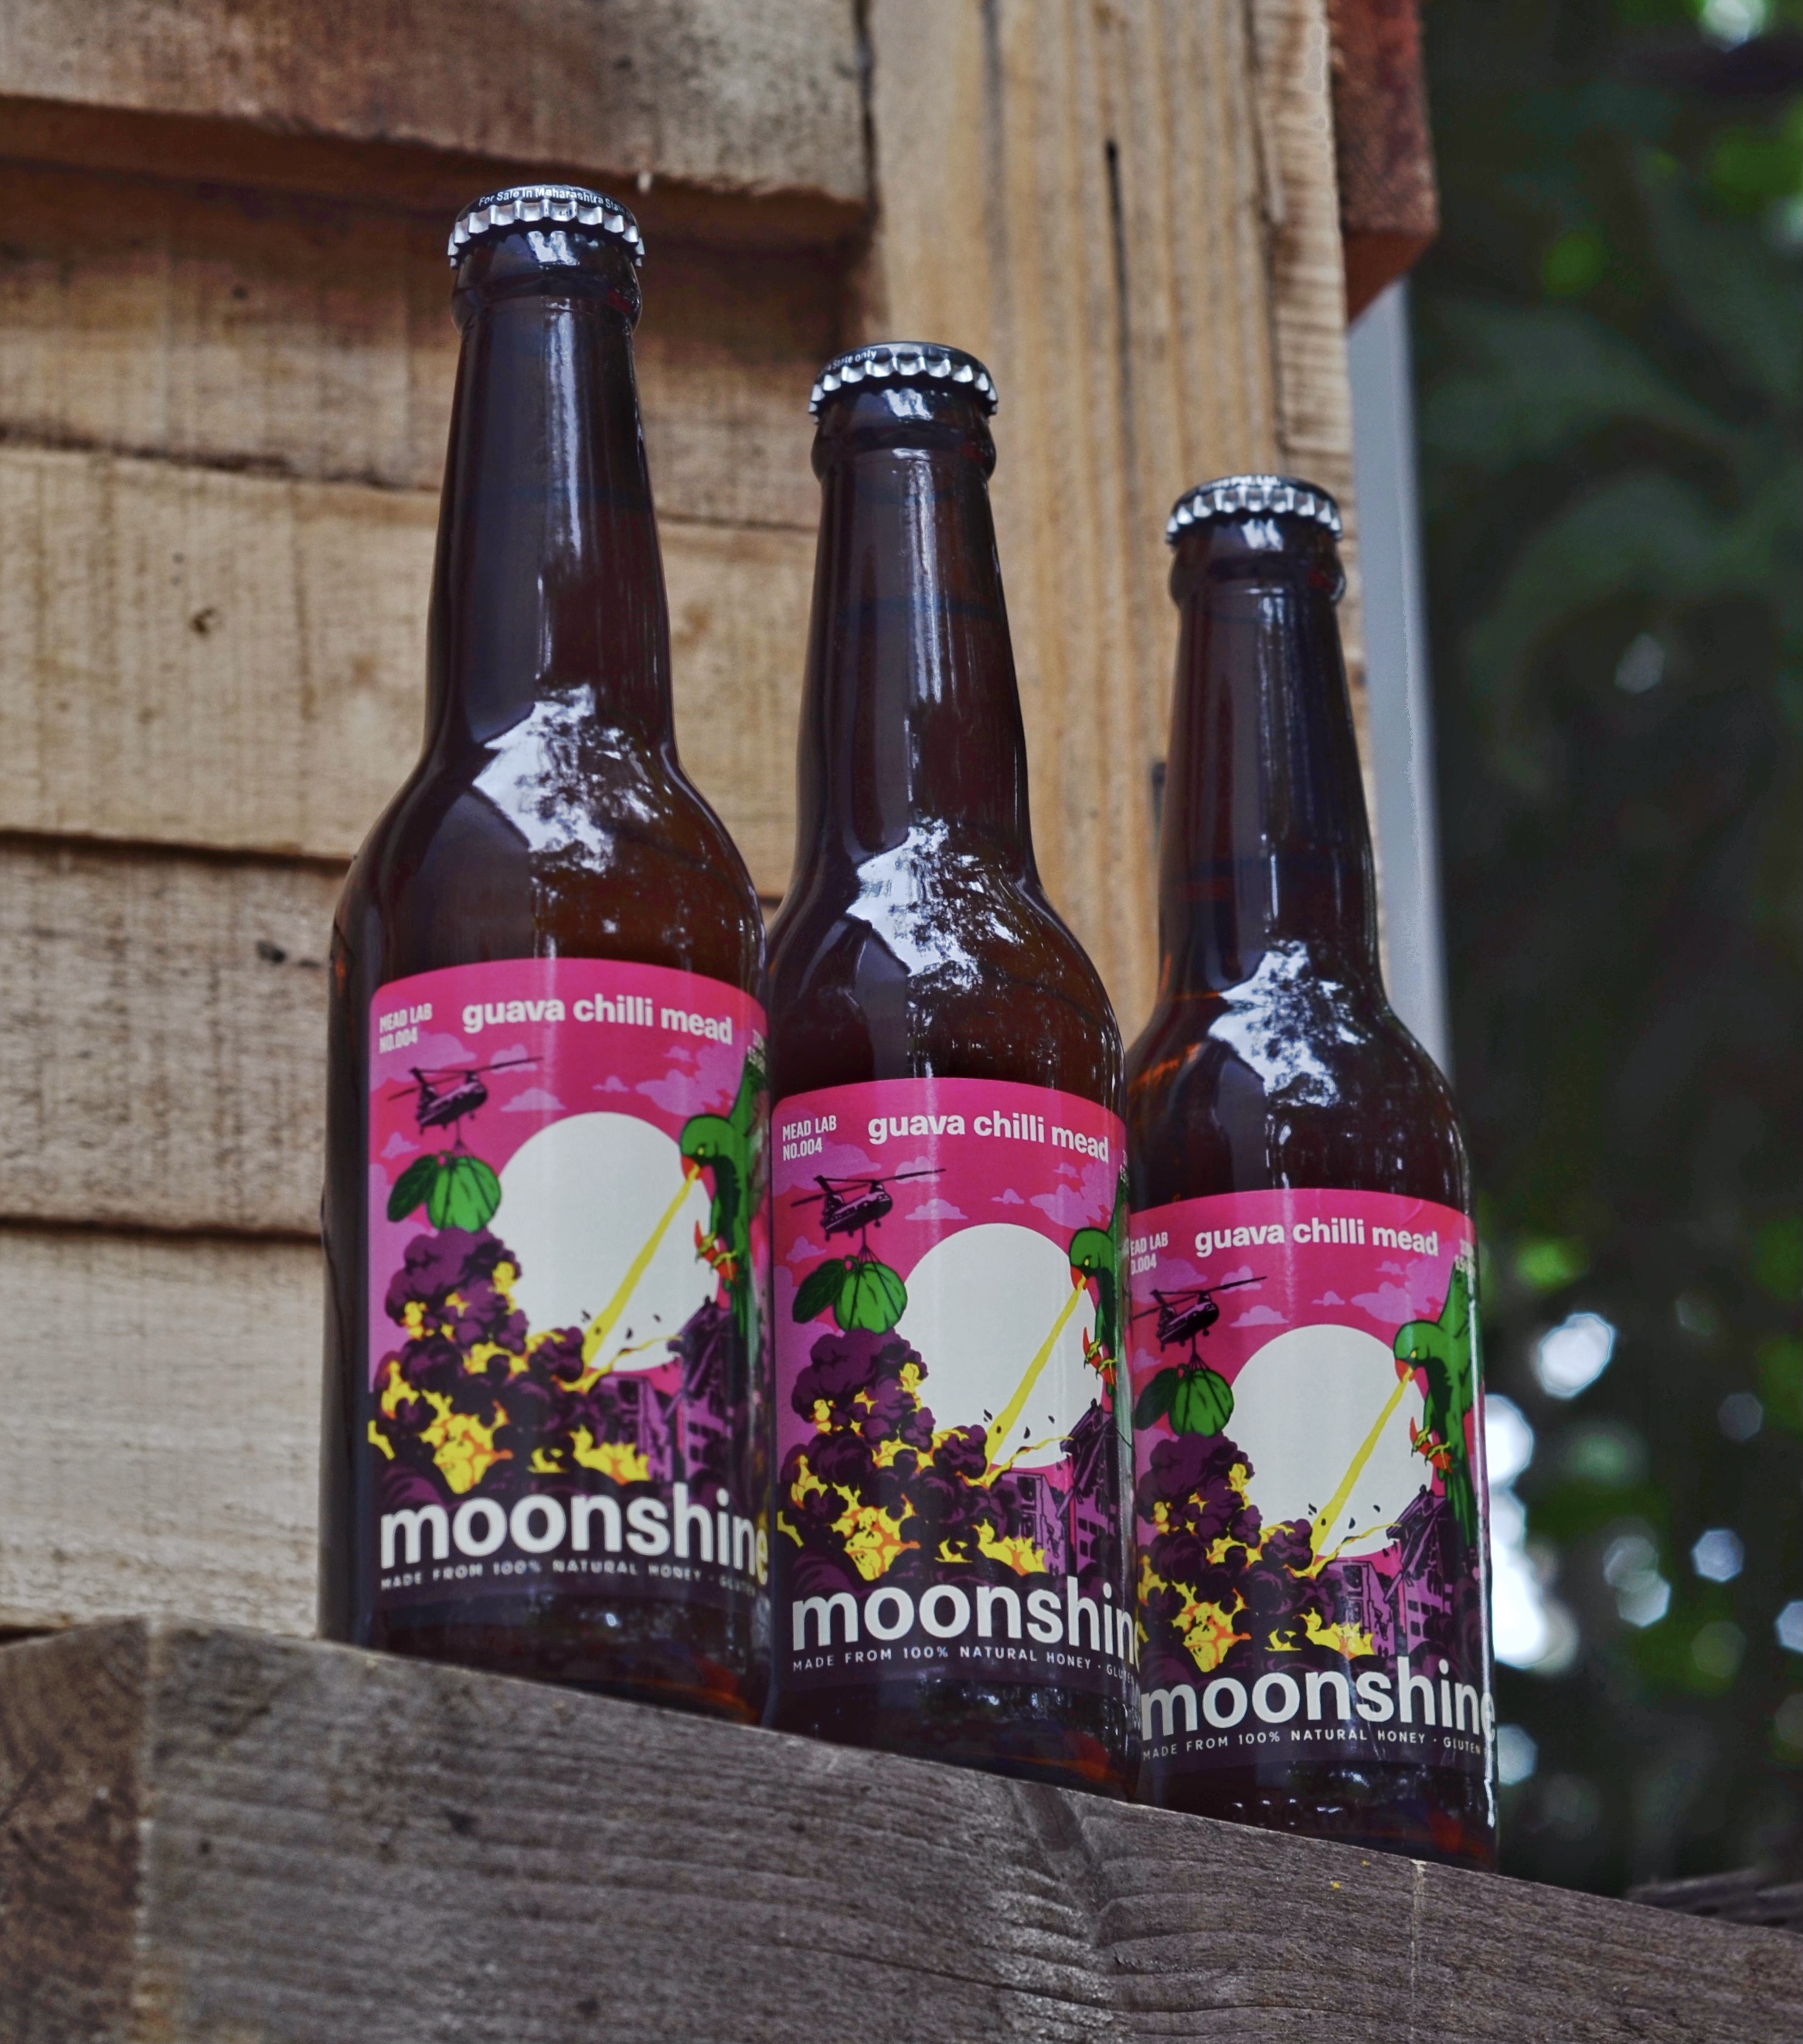 Moonshine, India’s first and largest Mead Brand introduces Guava Chilli Mead & Christmas Apple Pie Mead